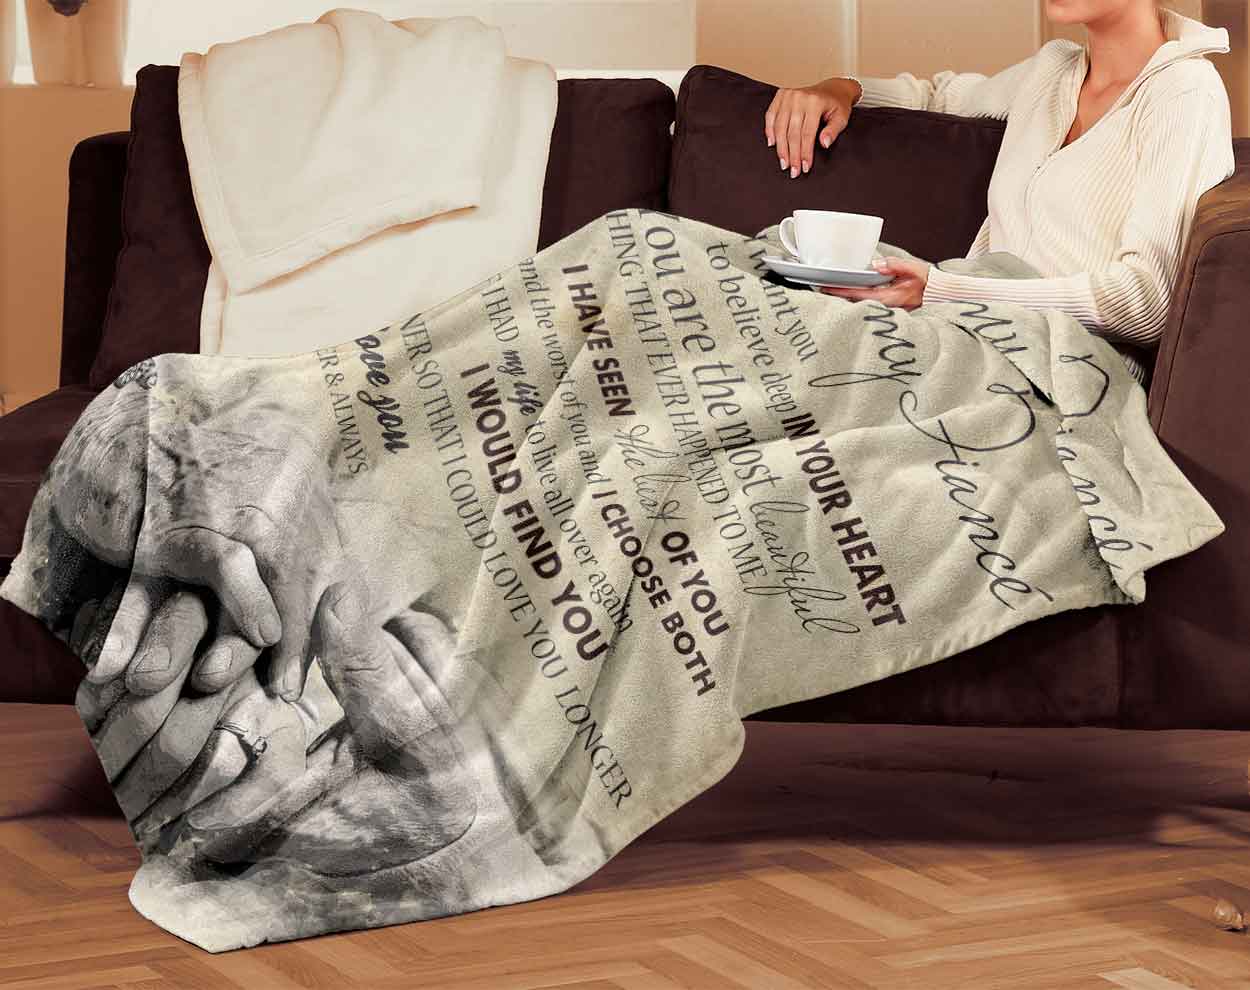 Skitongifts Blanket For Sofa Throws, Bed Throws blanket - To My Fiance I Want You To Believe Deep In Your Heart You Are The Most Beautiful-TT1301